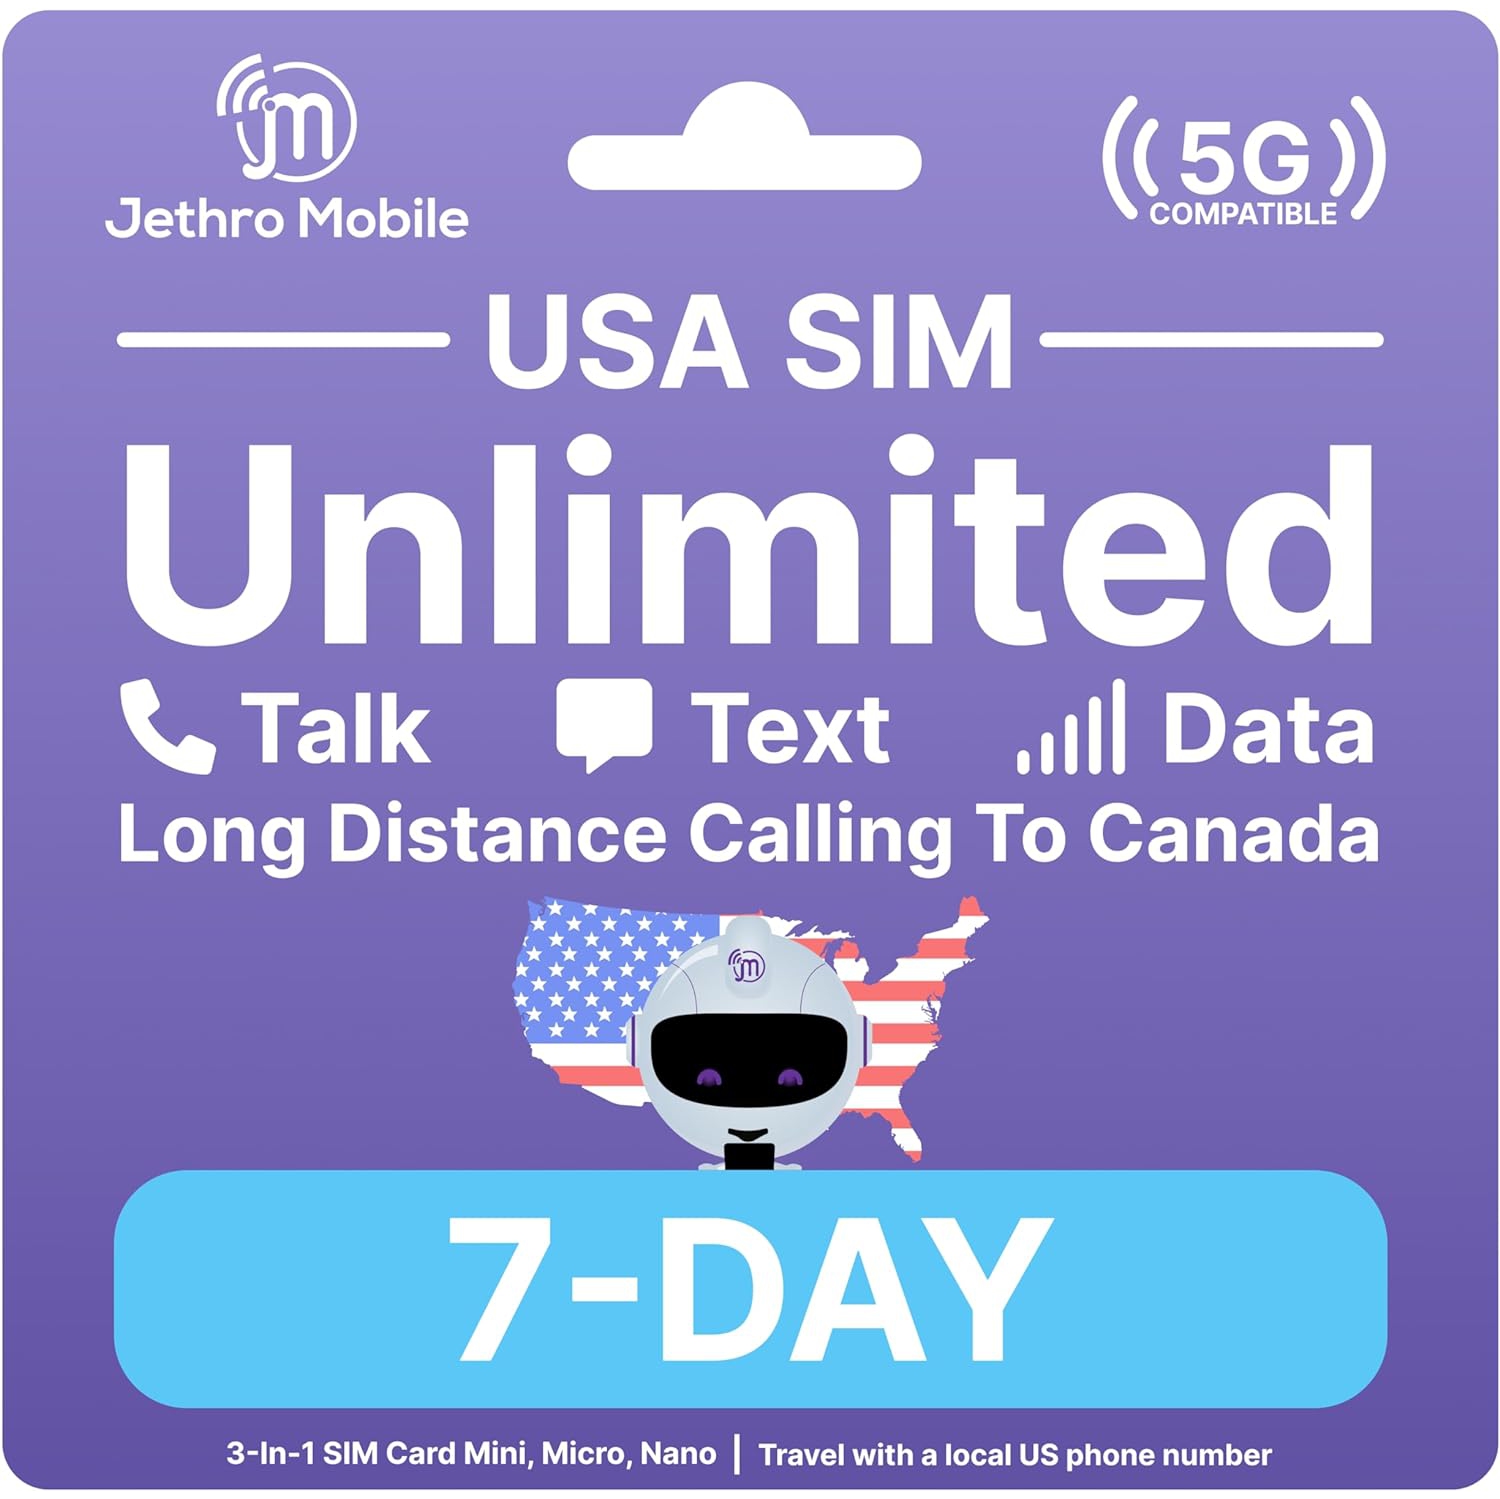 Jethro Mobile Prepaid USA Travel SIM card, 4G LTE High-Speed Data, Unlimited Talk and Text, No Contract, 7 Days